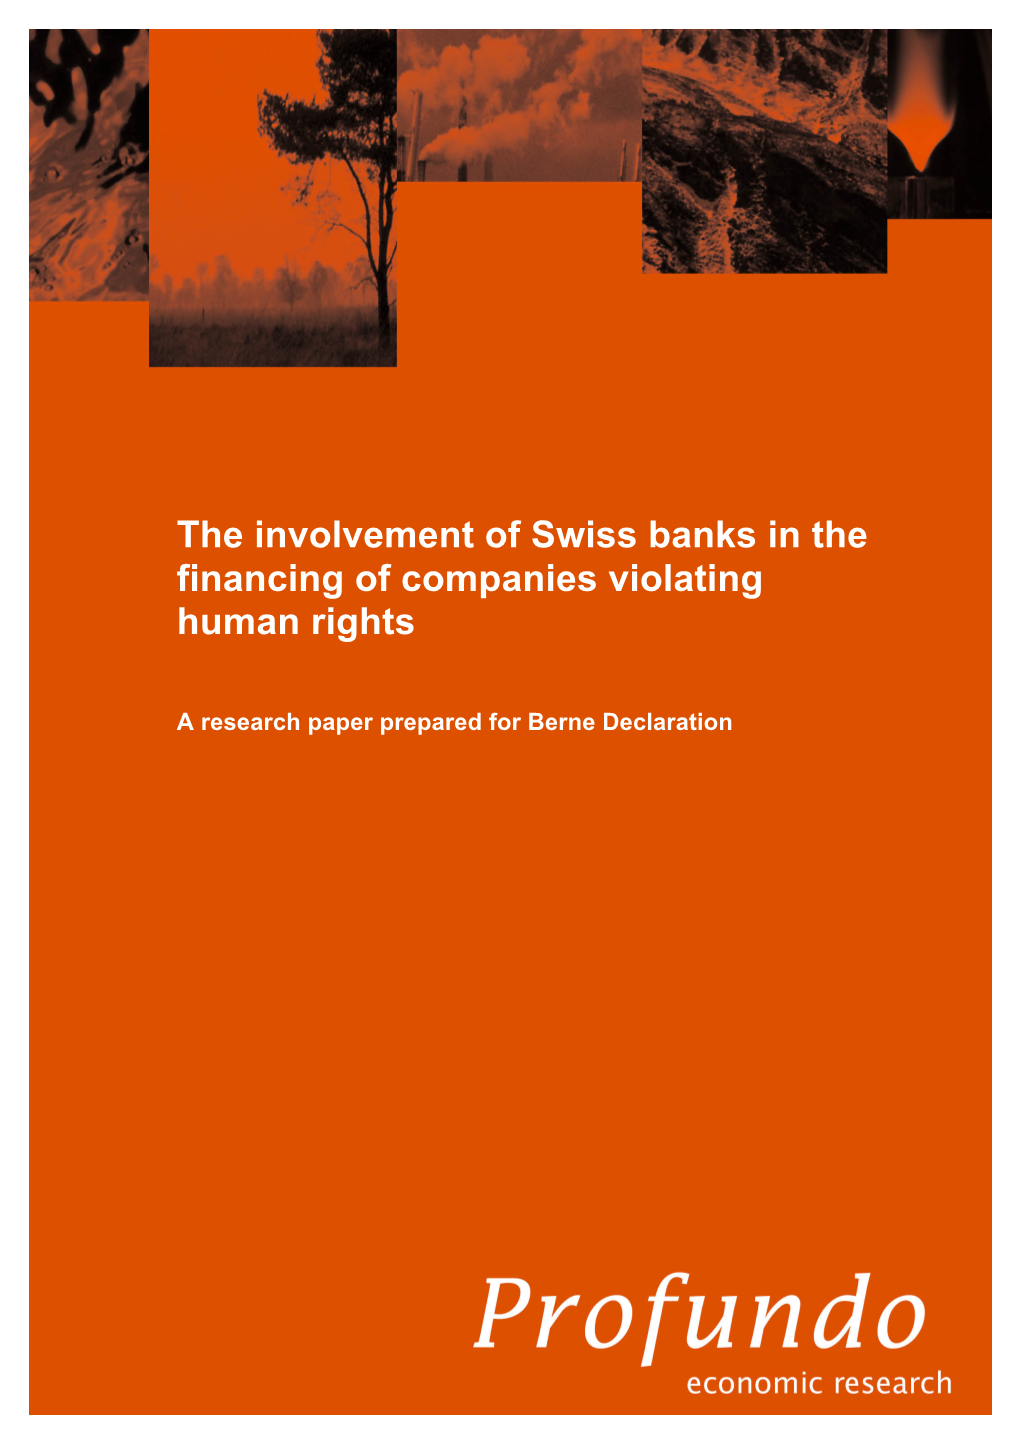 The Involvement of Swiss Banks in the Financing of Companies Violating Human Rights